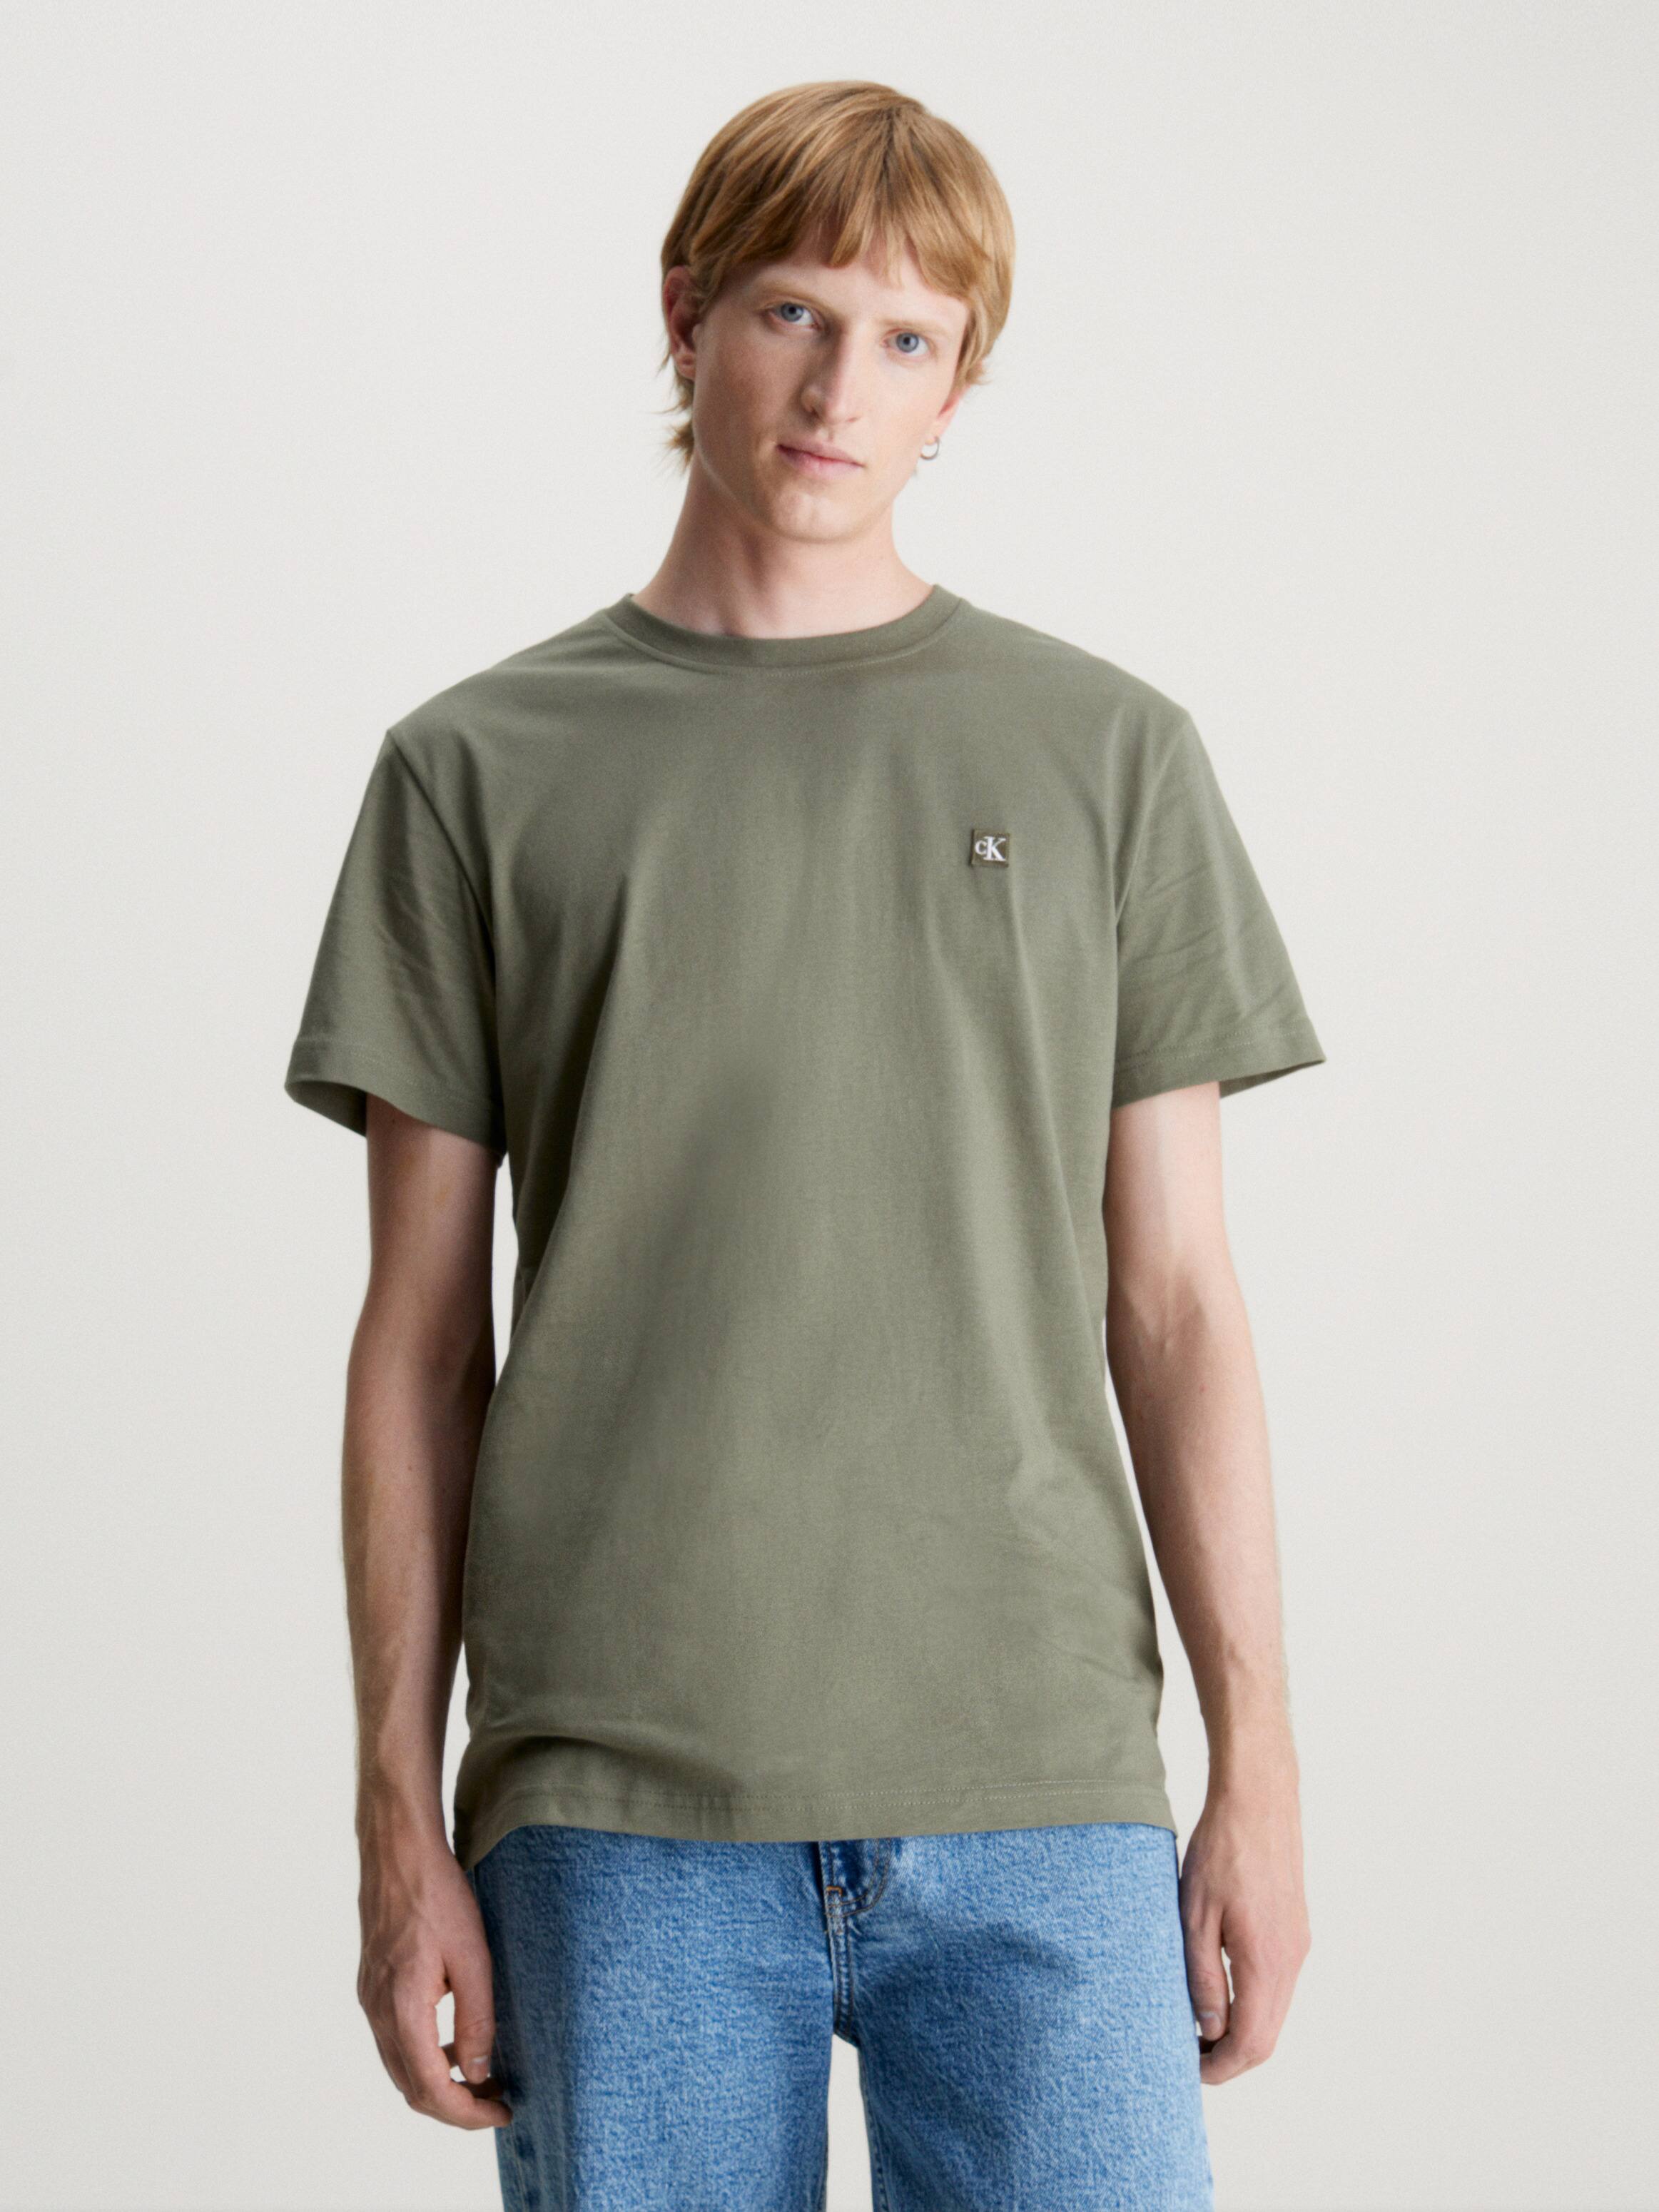 Embroidered Badge Tee In Dust Olive